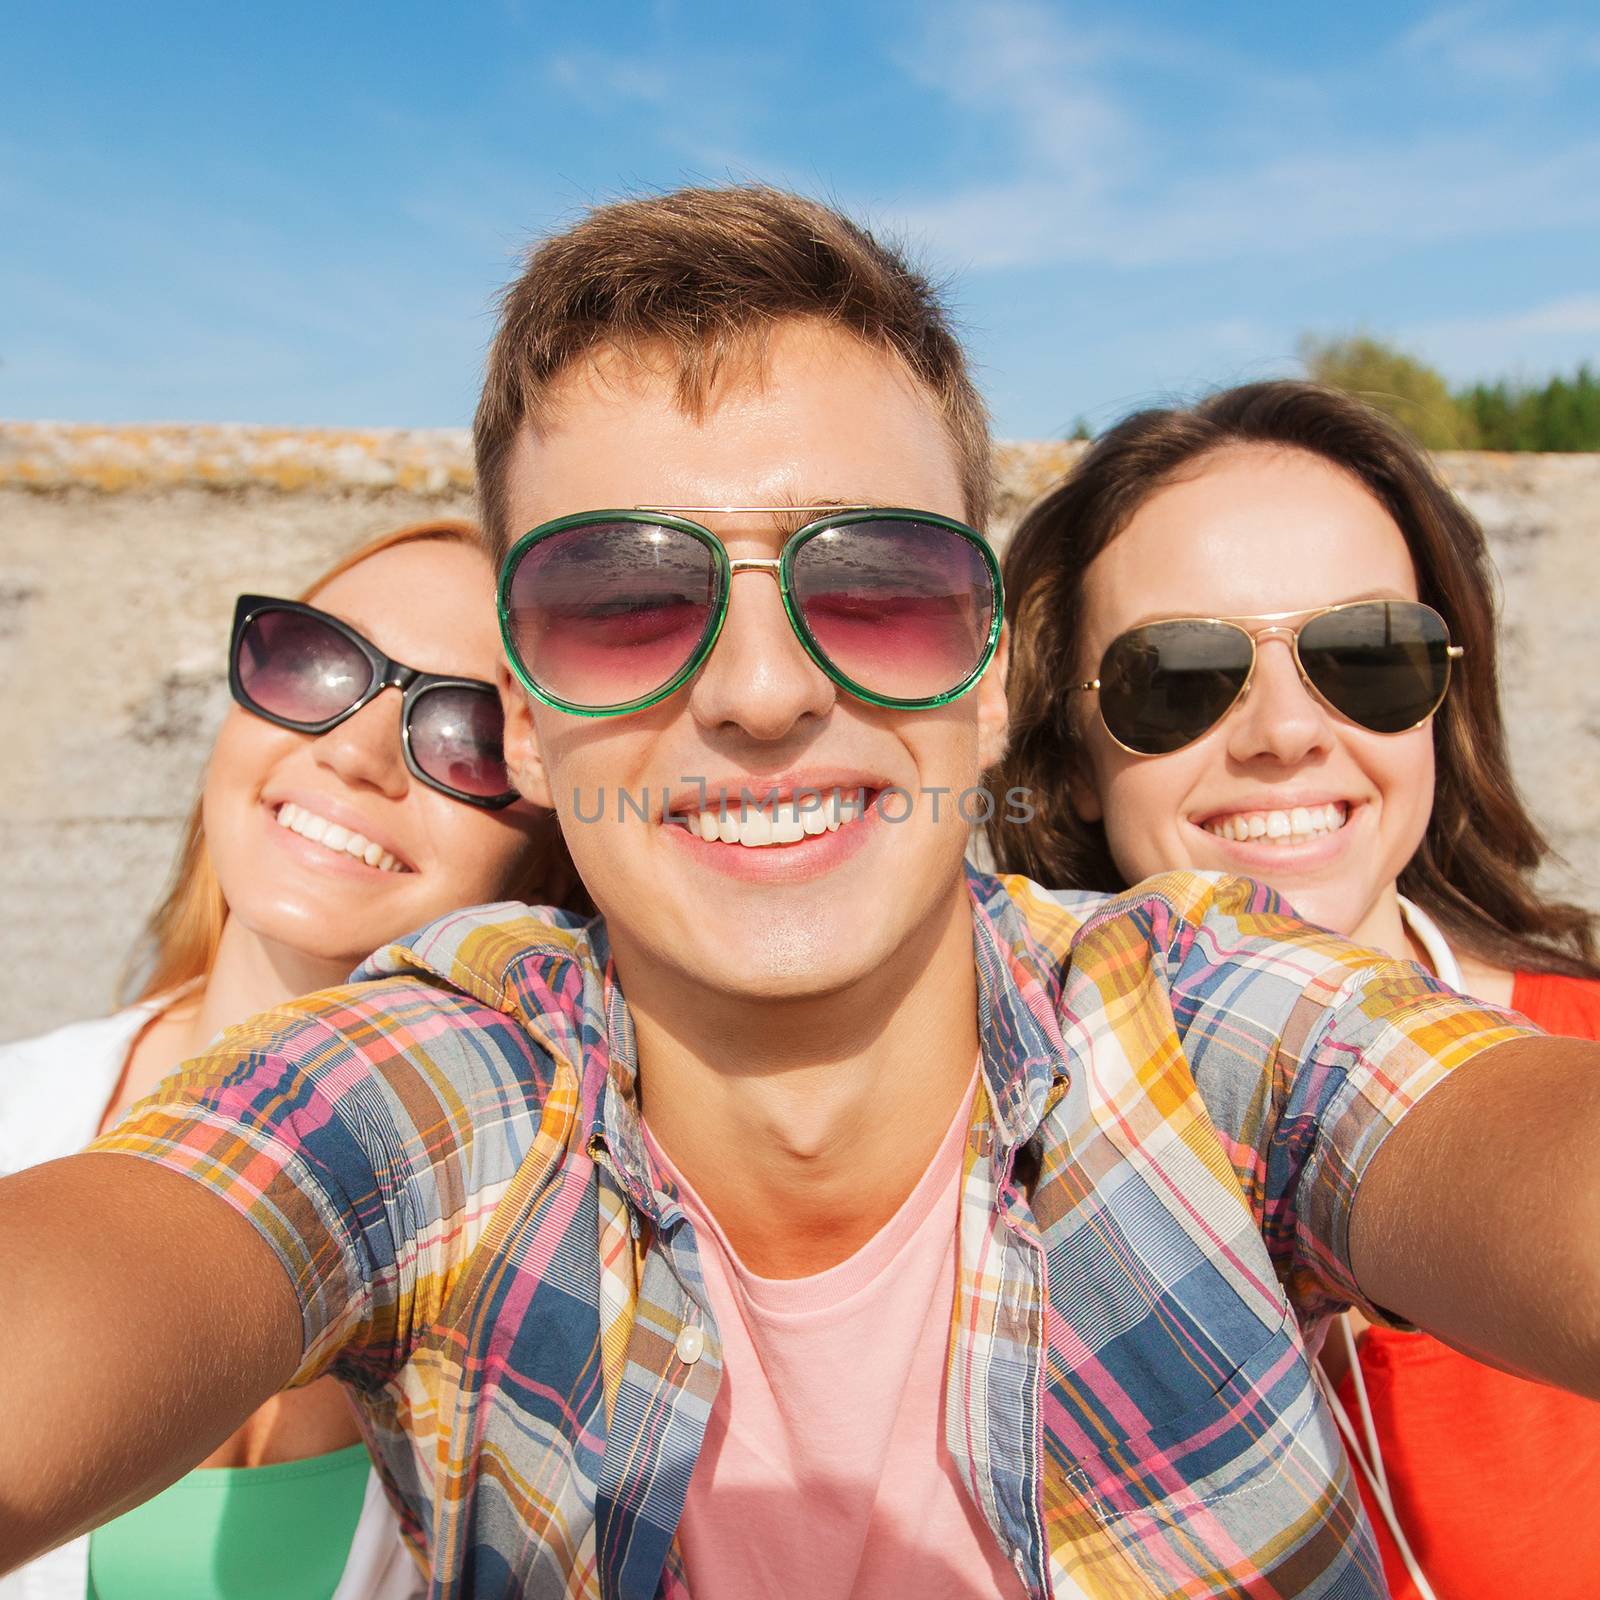 friendship, leisure, summer, technology and people concept - group of smiling friends taking selfie outdoors